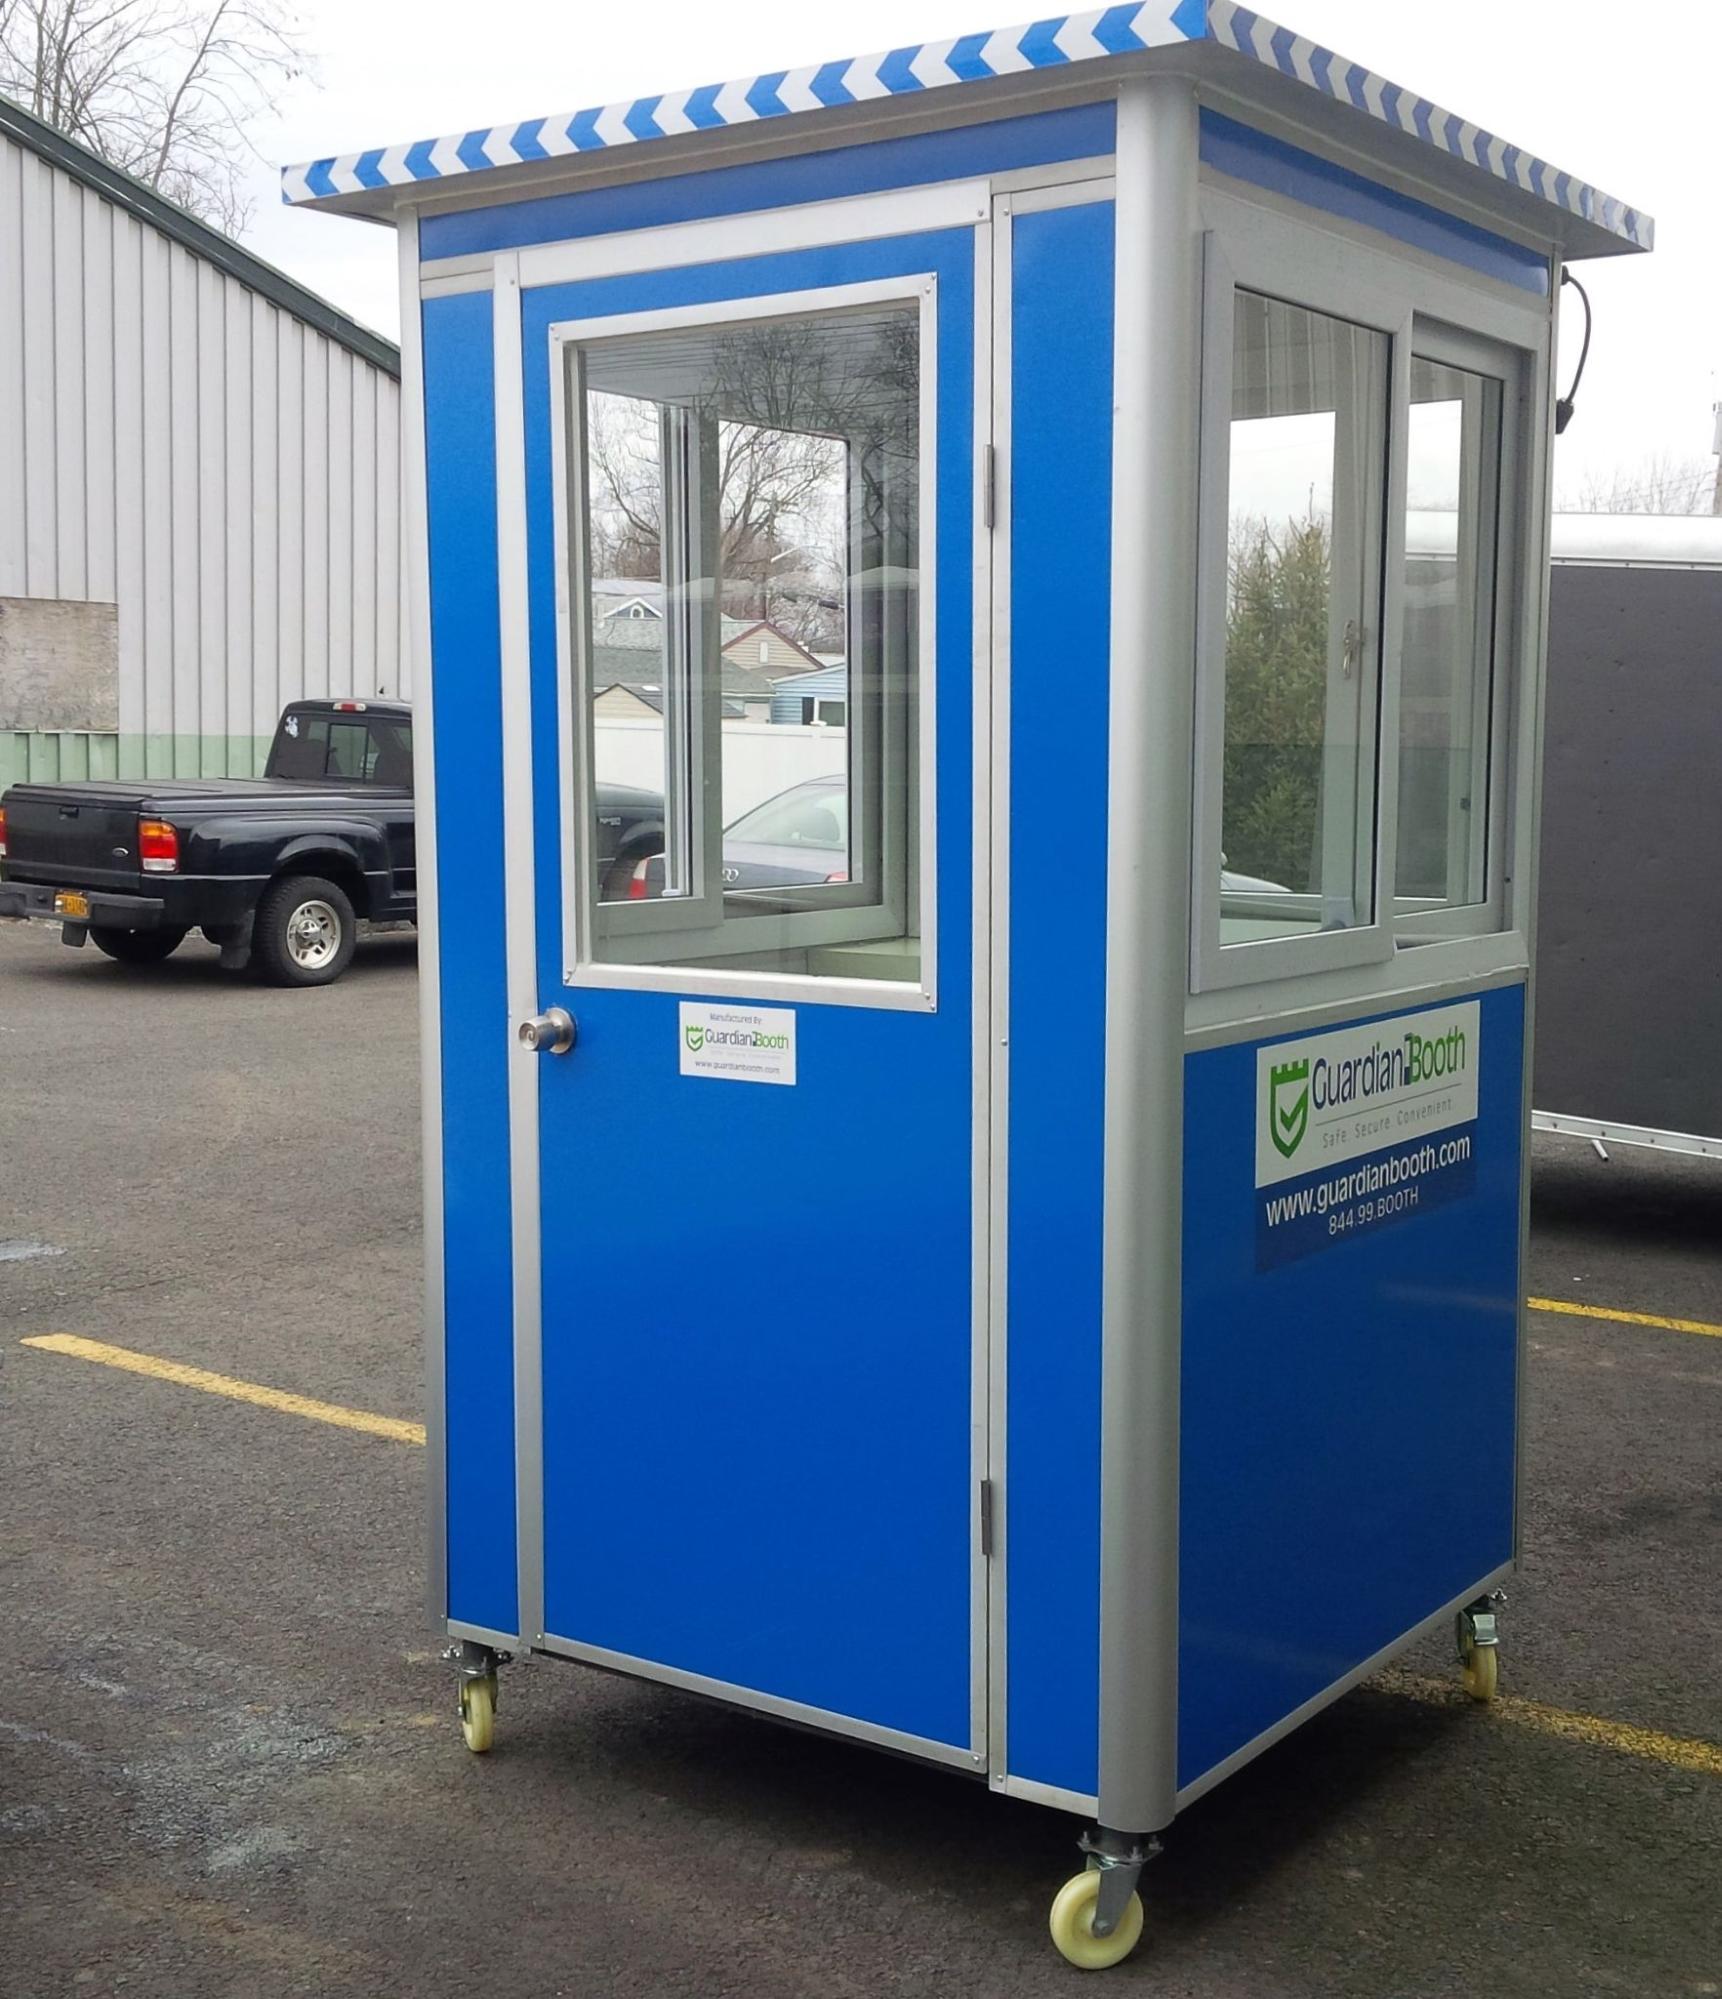 gas station guard booth to enhance oil and gas site safety